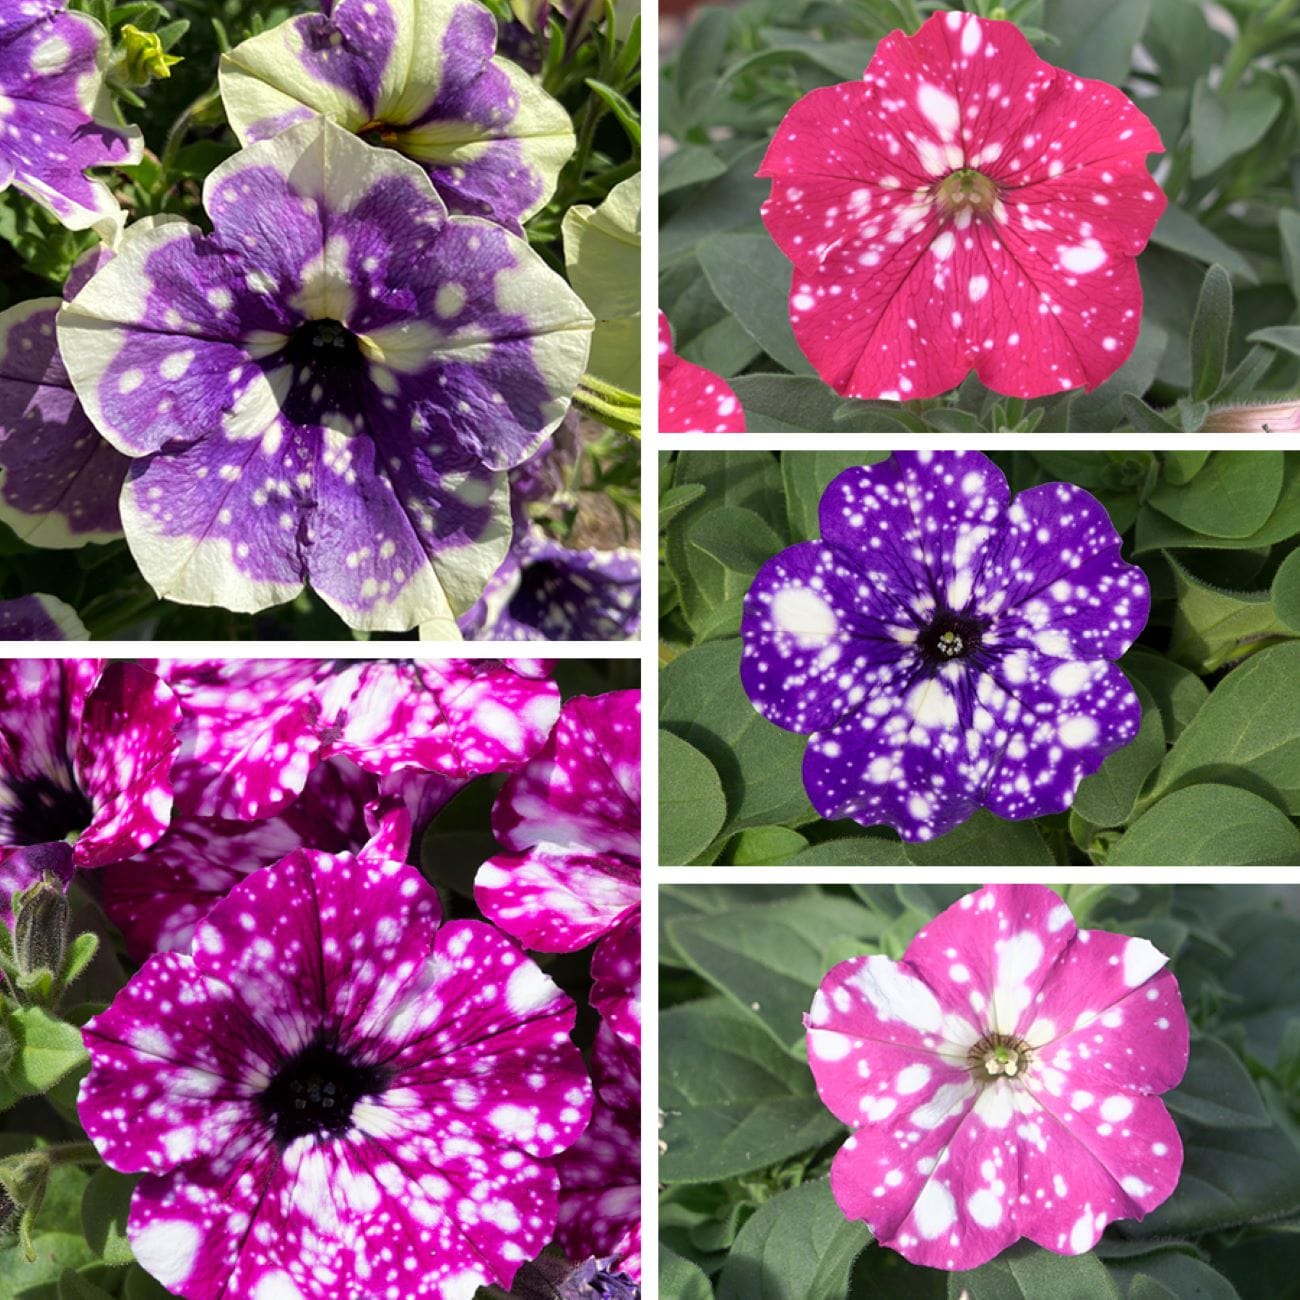 15 x Young Plants, 3 of each variety Petunia Sparkling Sky Plants